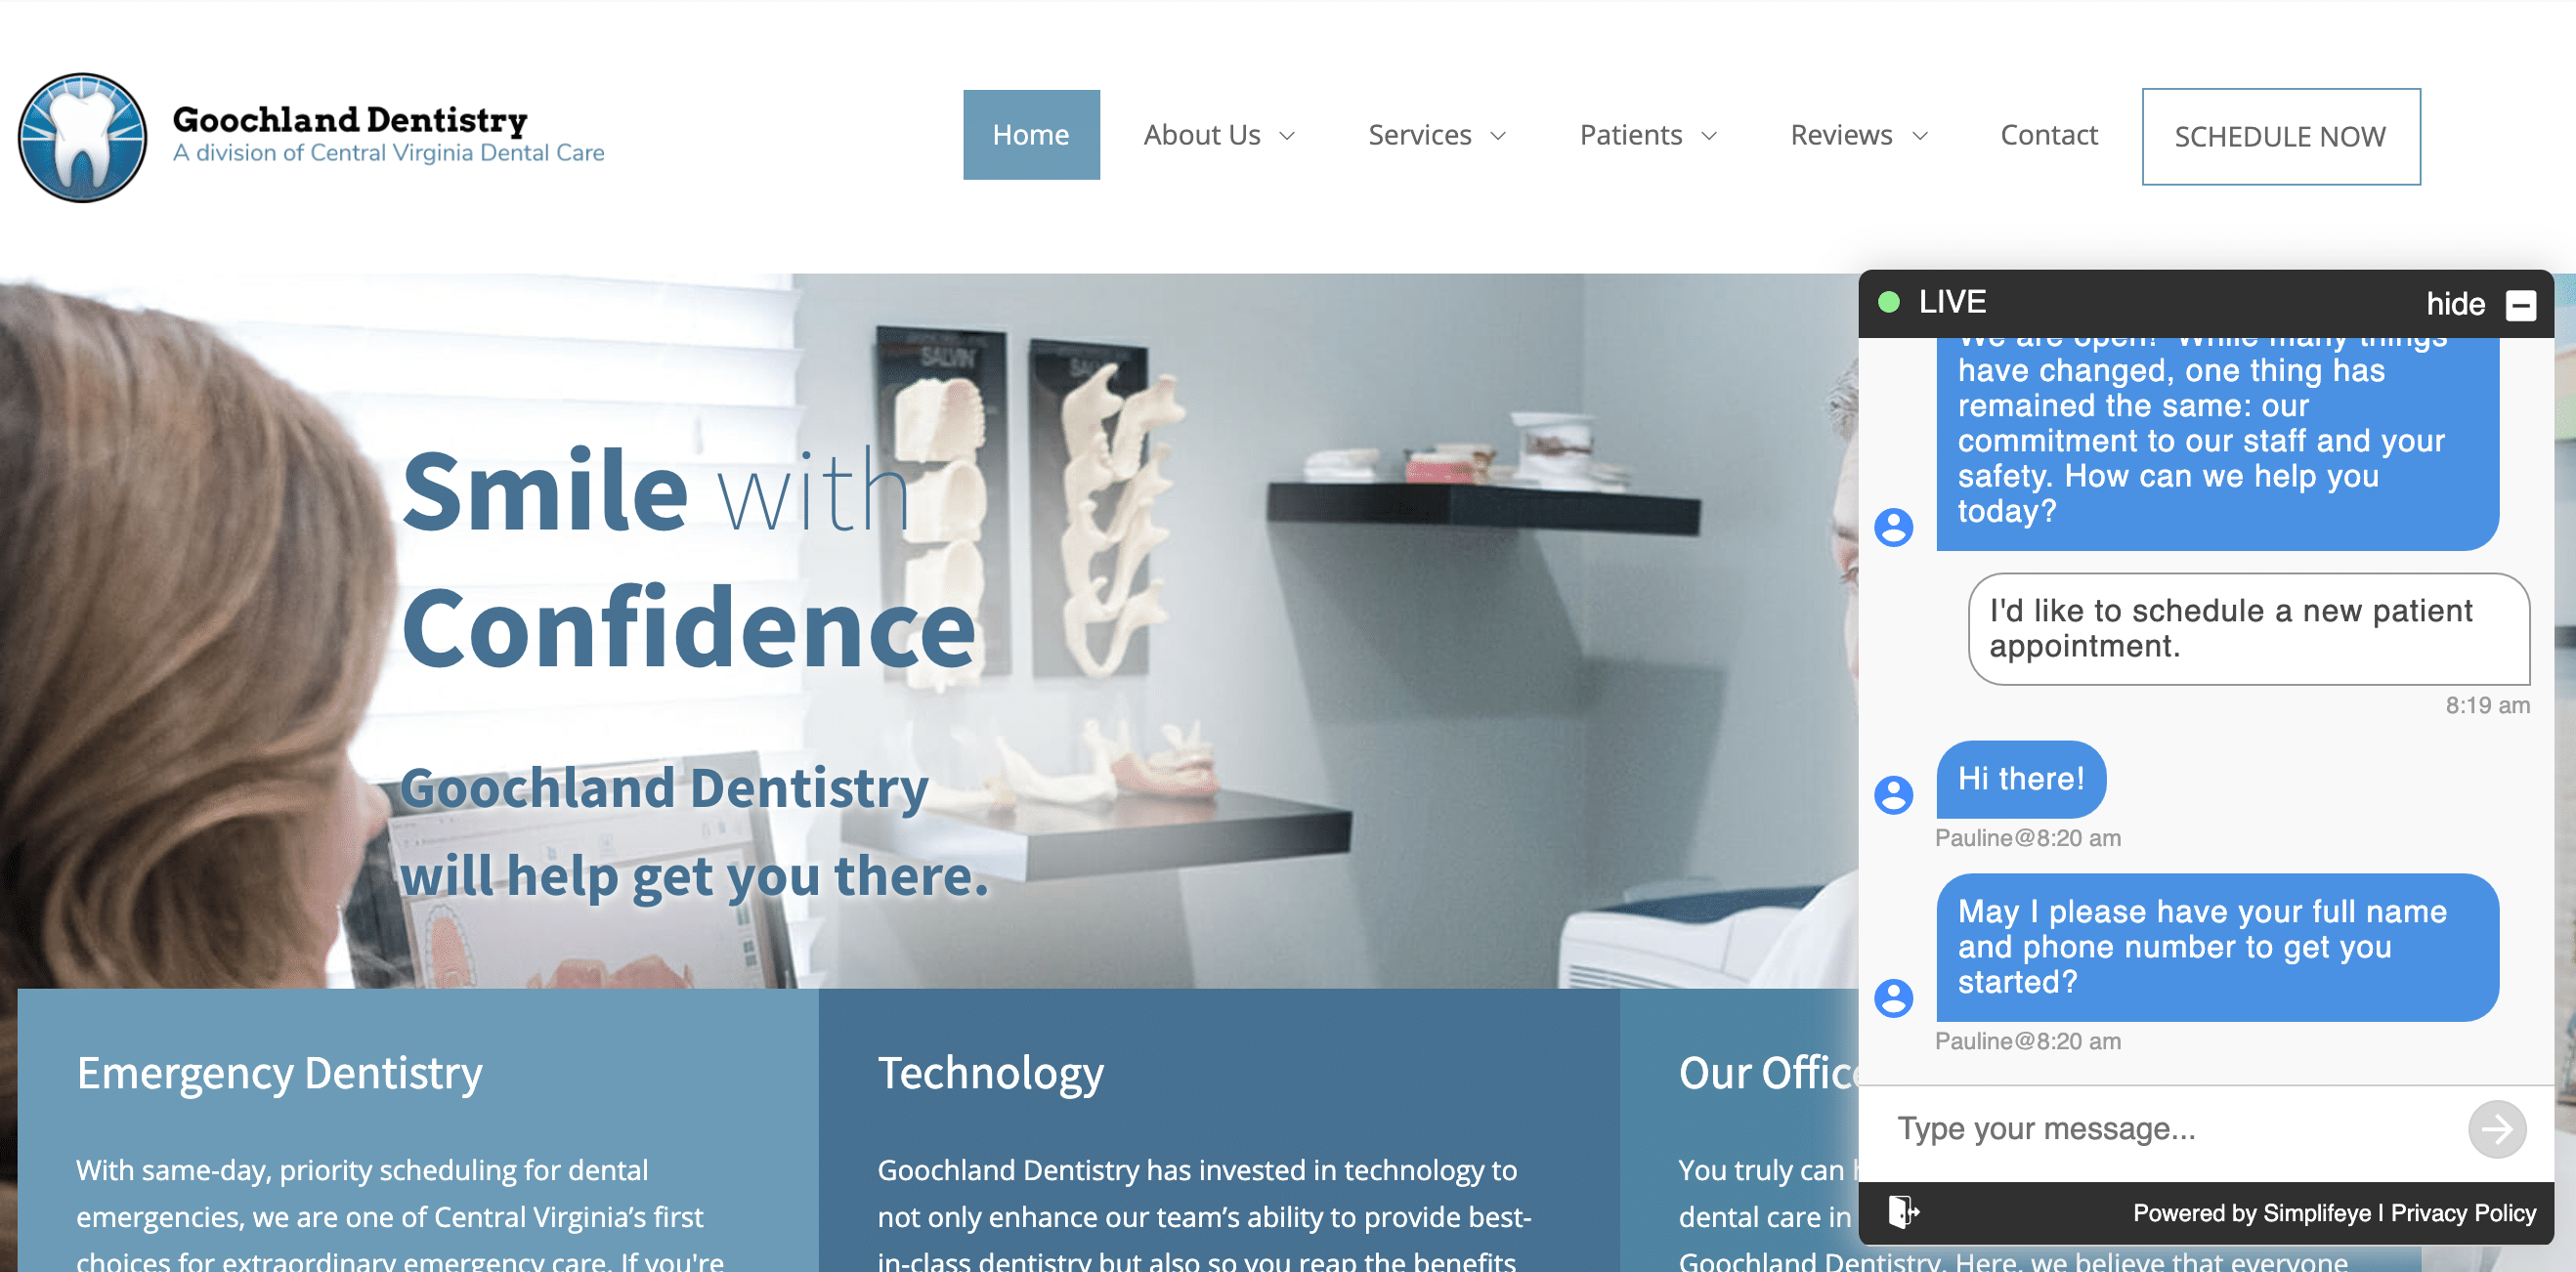 Smile With Confidence tag line on Dental Website